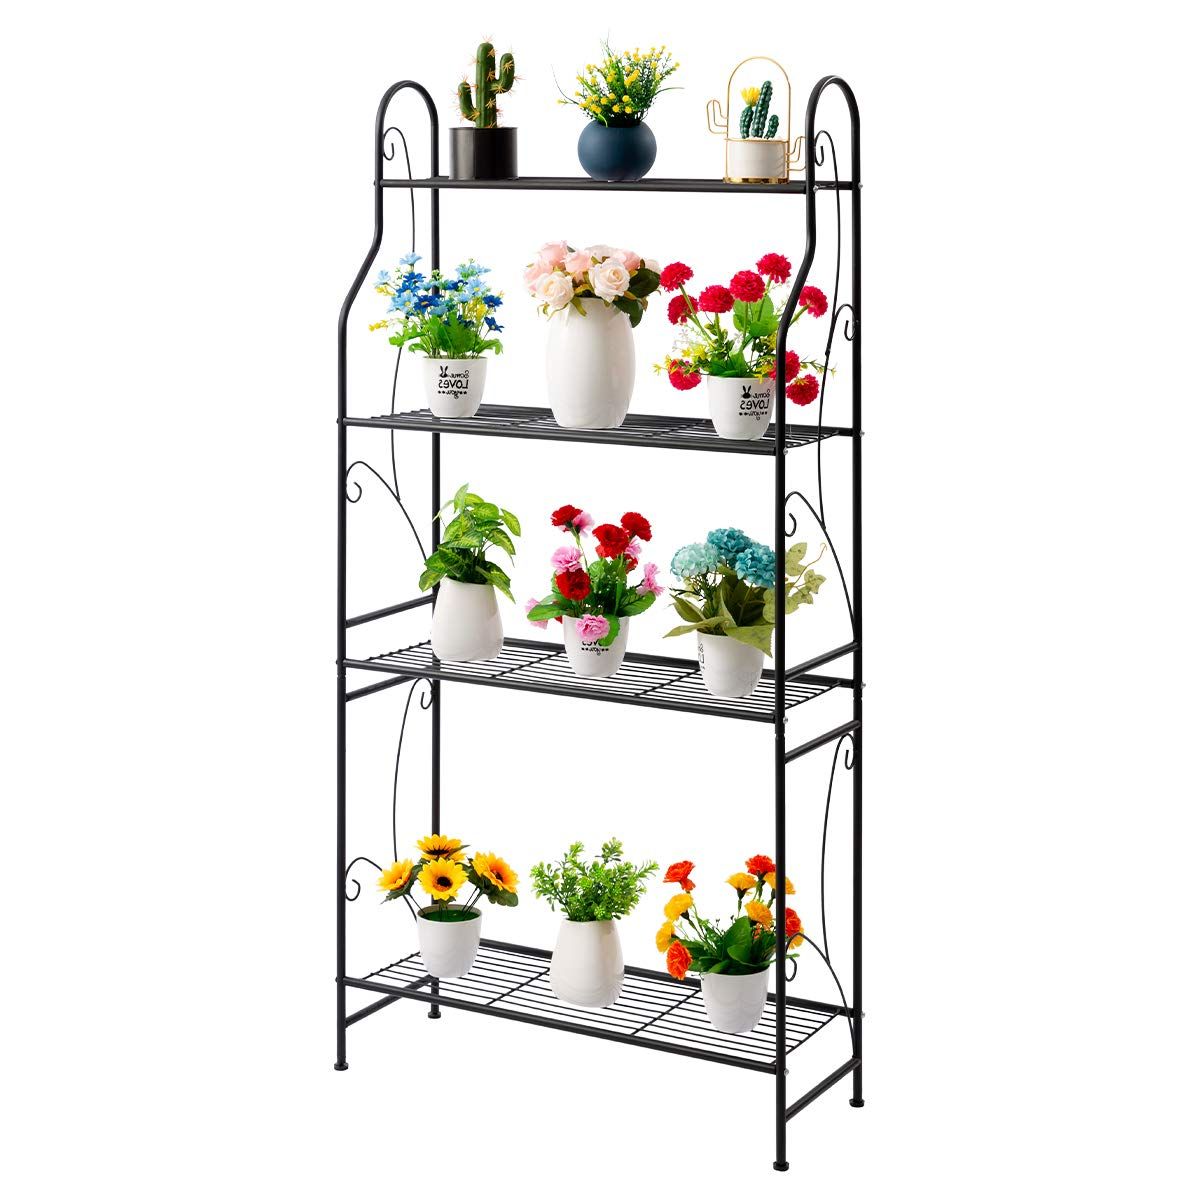 Four Tier Metal Plant Stands For Recent Doeworks 4 Tier Metal Plant Stand, Plant Display Rack, Ladder Shaped Stand  Shelf, Pot Holder For Indoor Outdoor Use, Black (View 1 of 15)